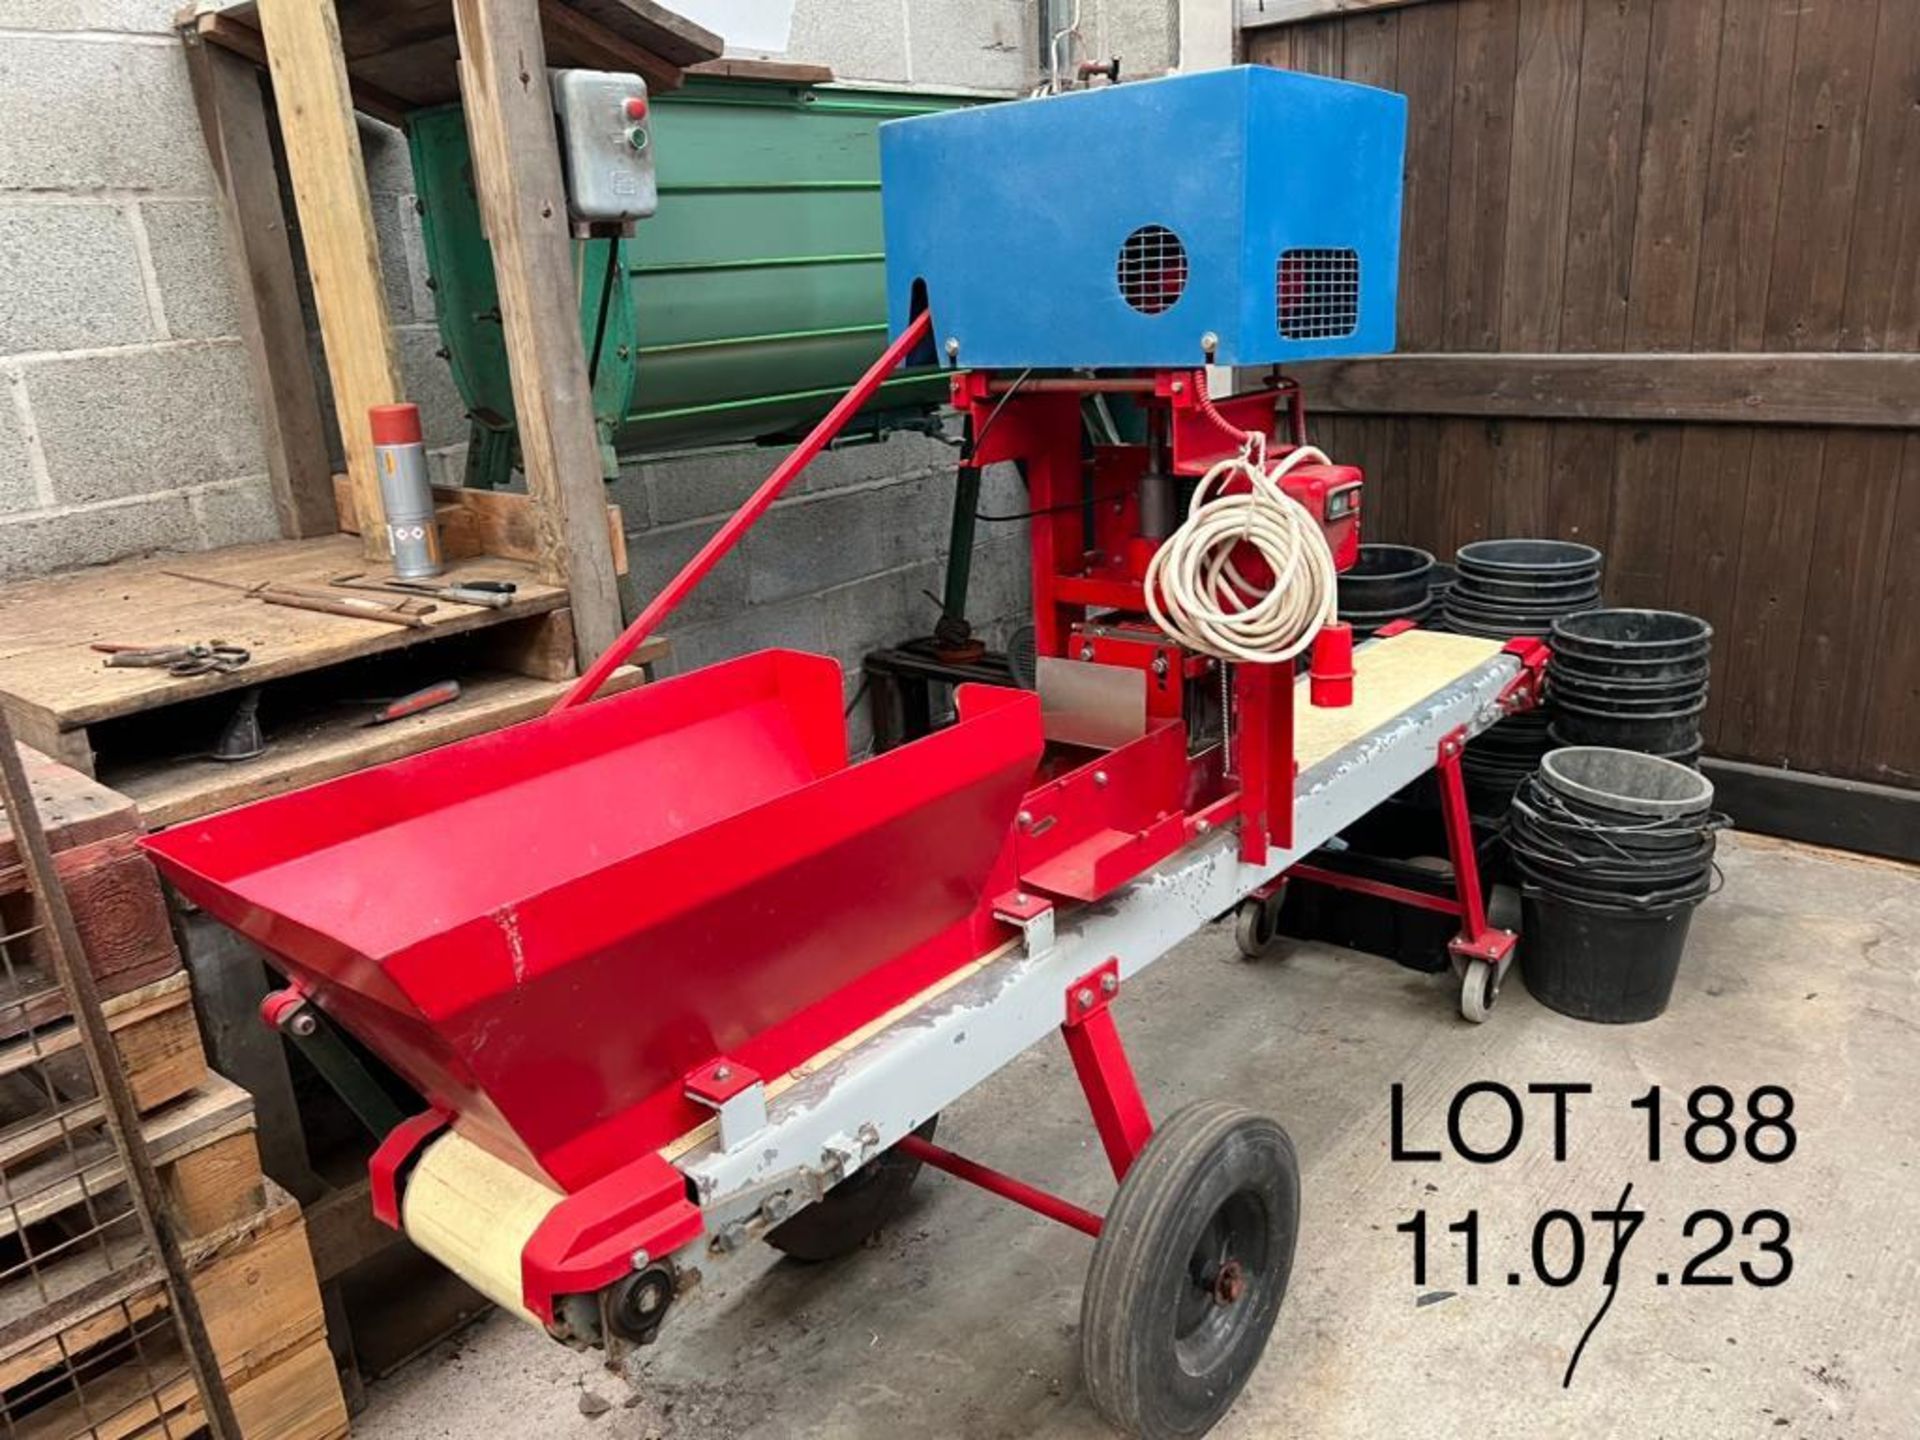 OLIC ANA BLOCK MAKER WITH 5 ROW SOWER, CONVEYOR 90" LONG & 11" WIDE (BELT 8.5" WIDE) GOOD WORKING